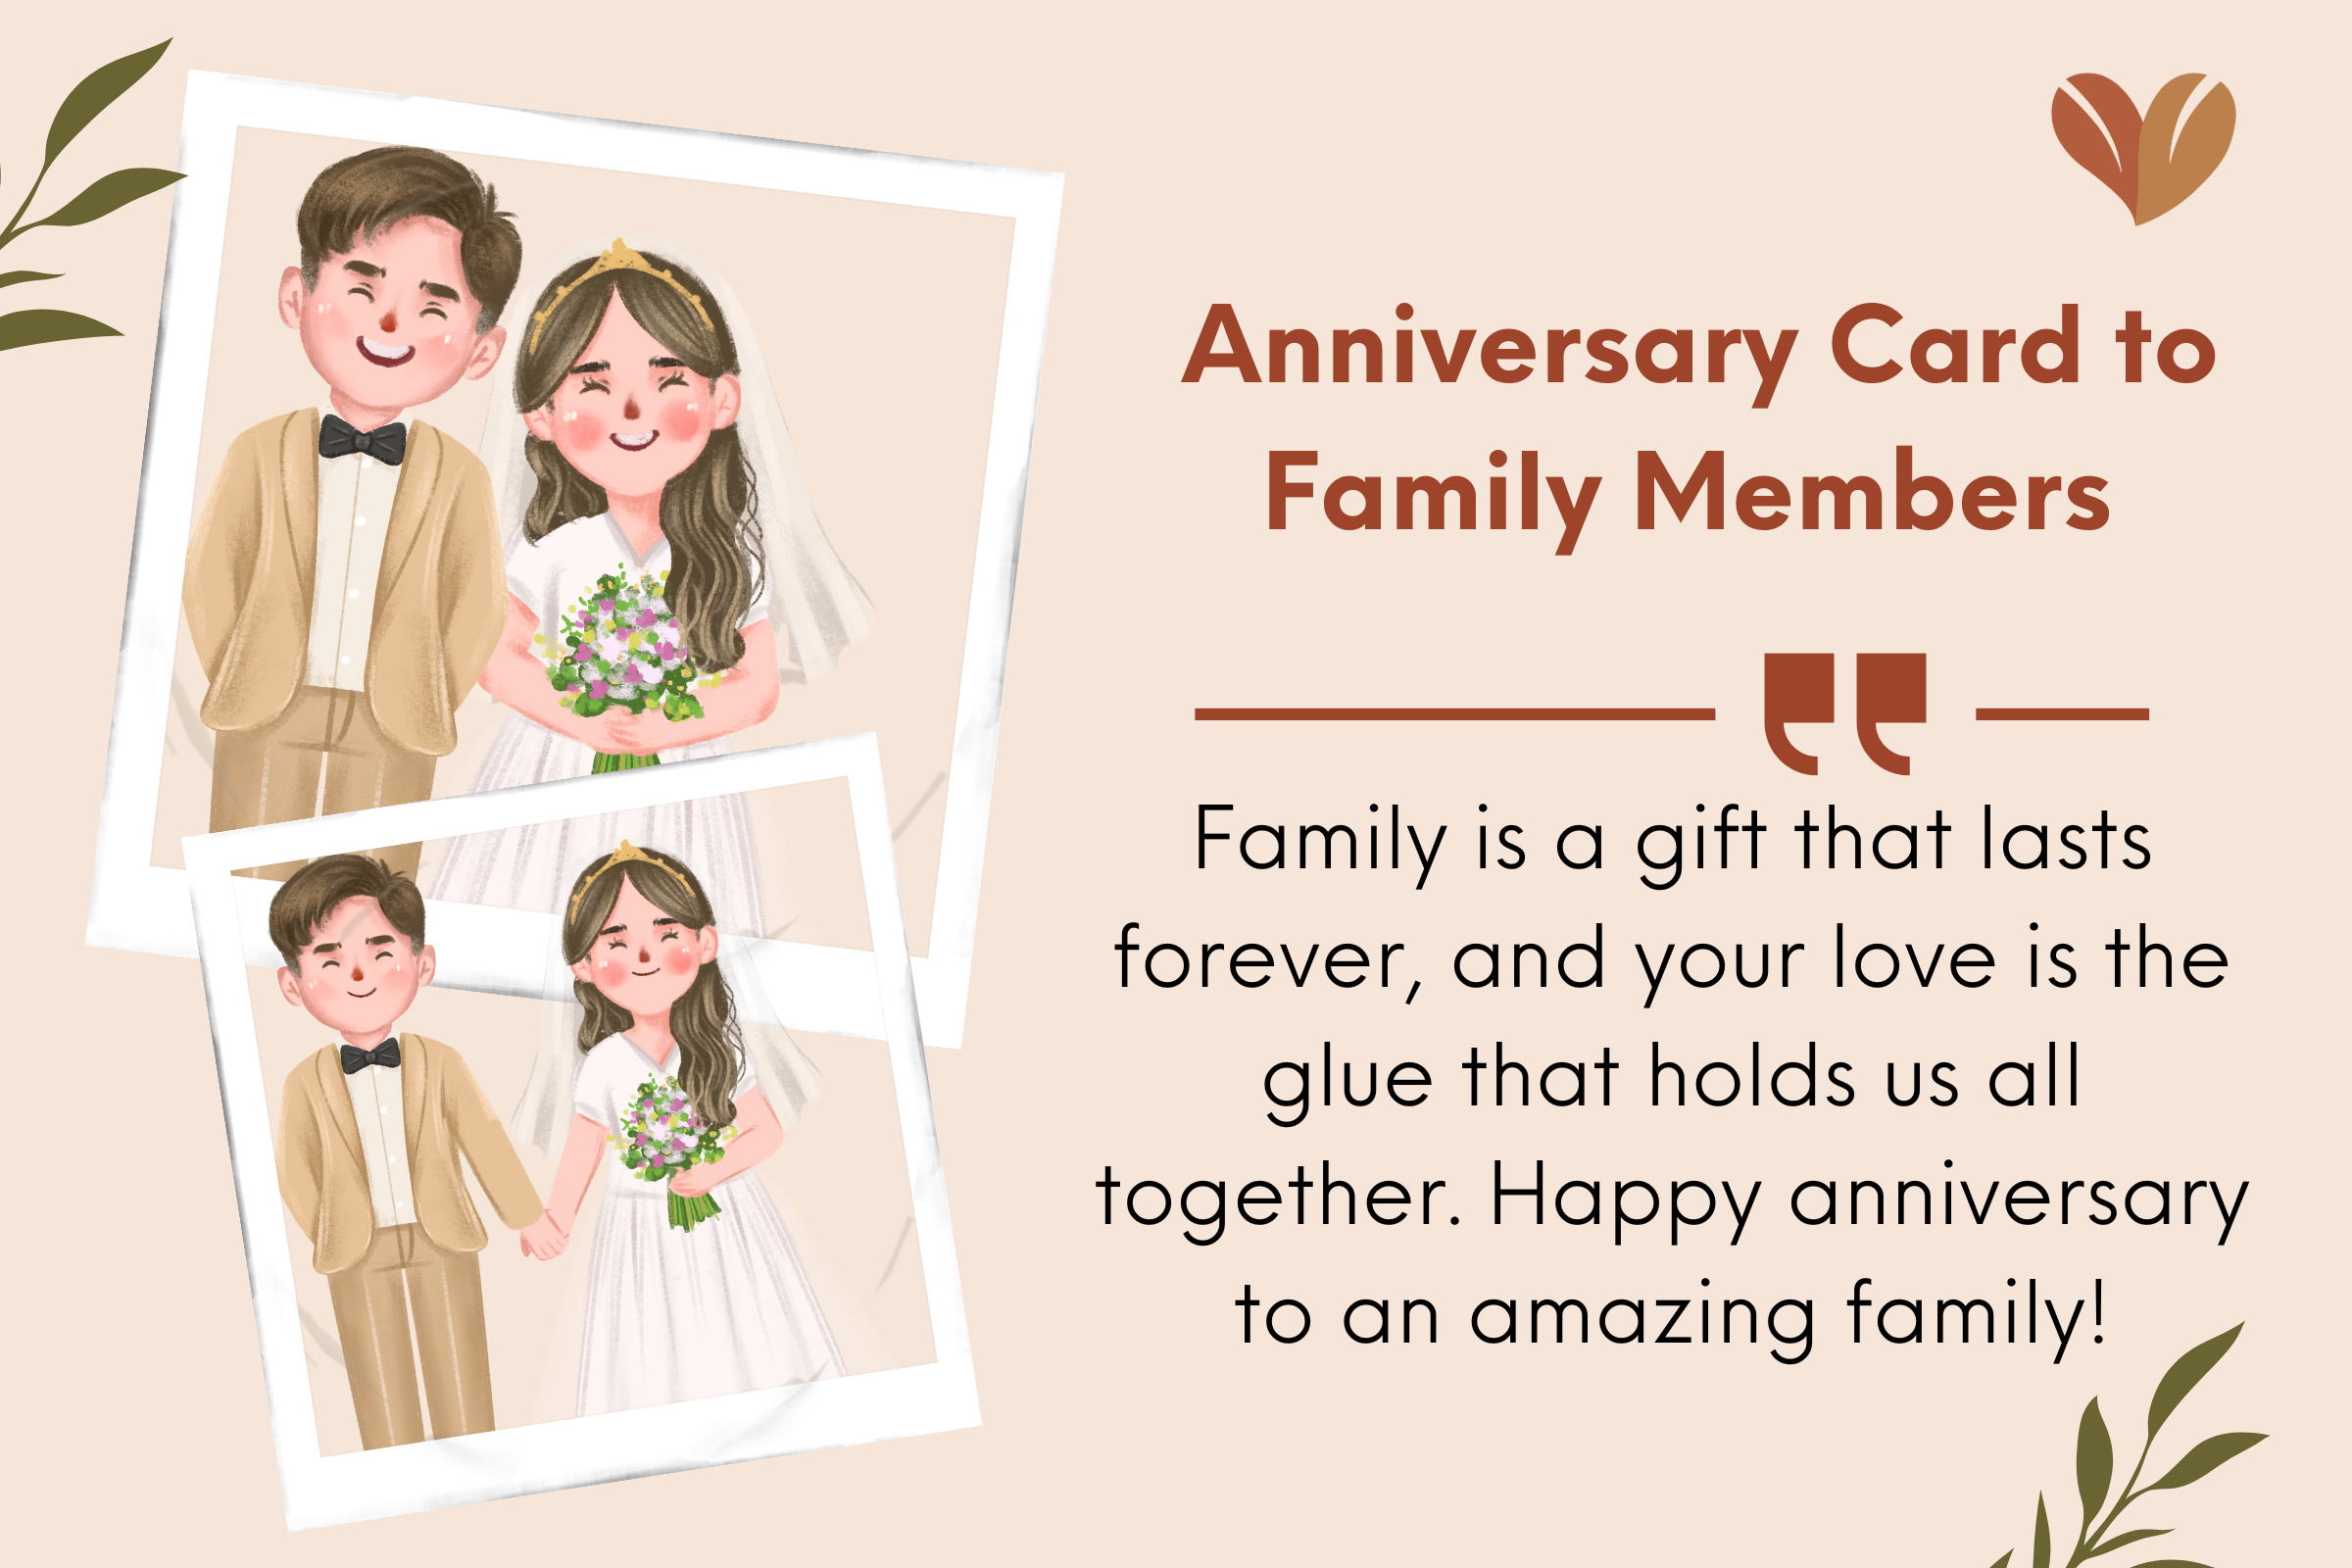 Happy Married Anniversary Messages to Family Members